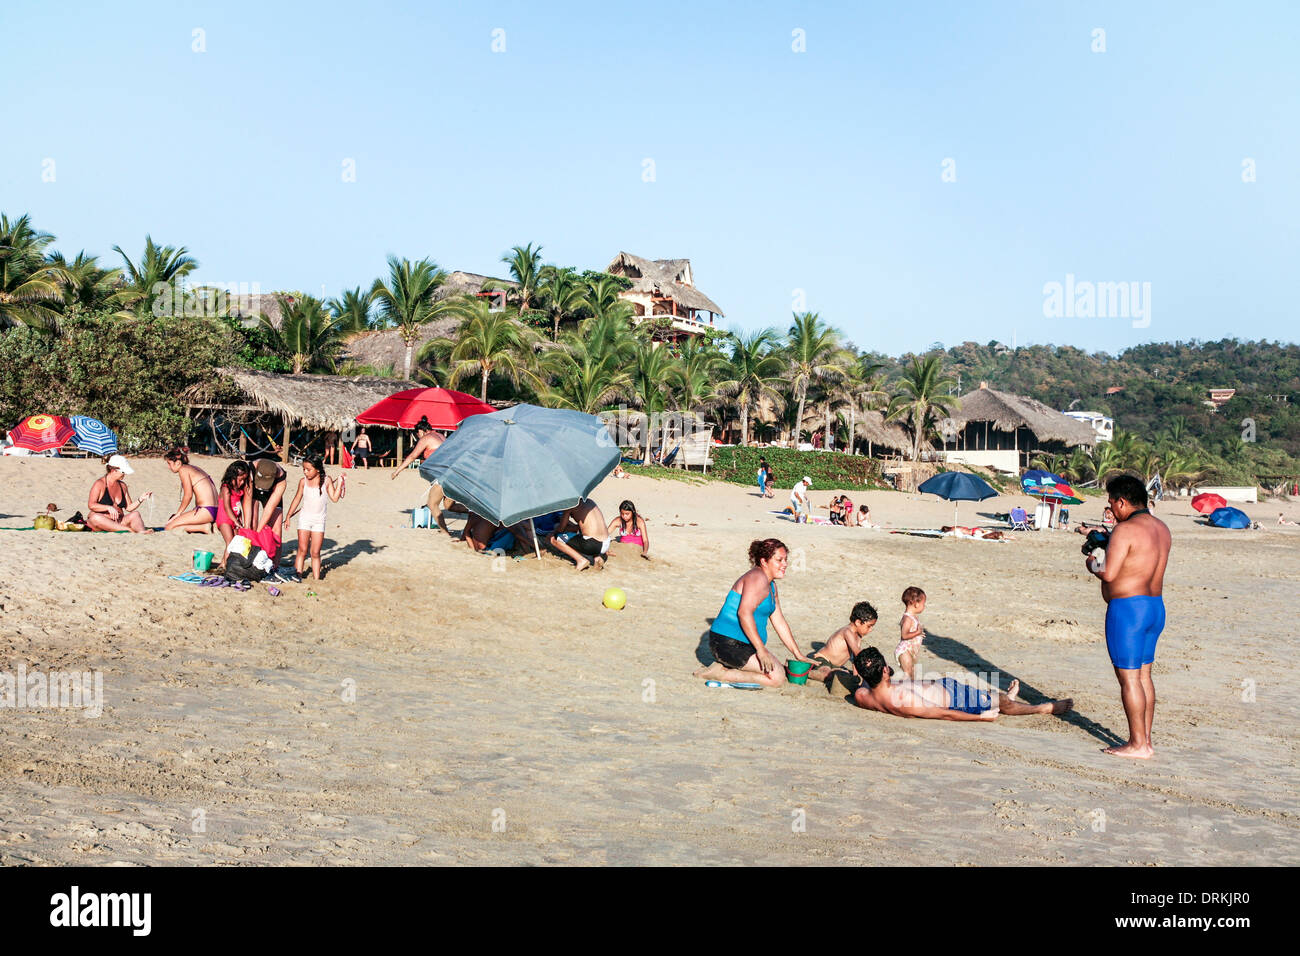 crowded beach on January 31 2013 as people enjoy a relaxing lazy sunny afternoon on the sand before the New Year celebrations Stock Photo